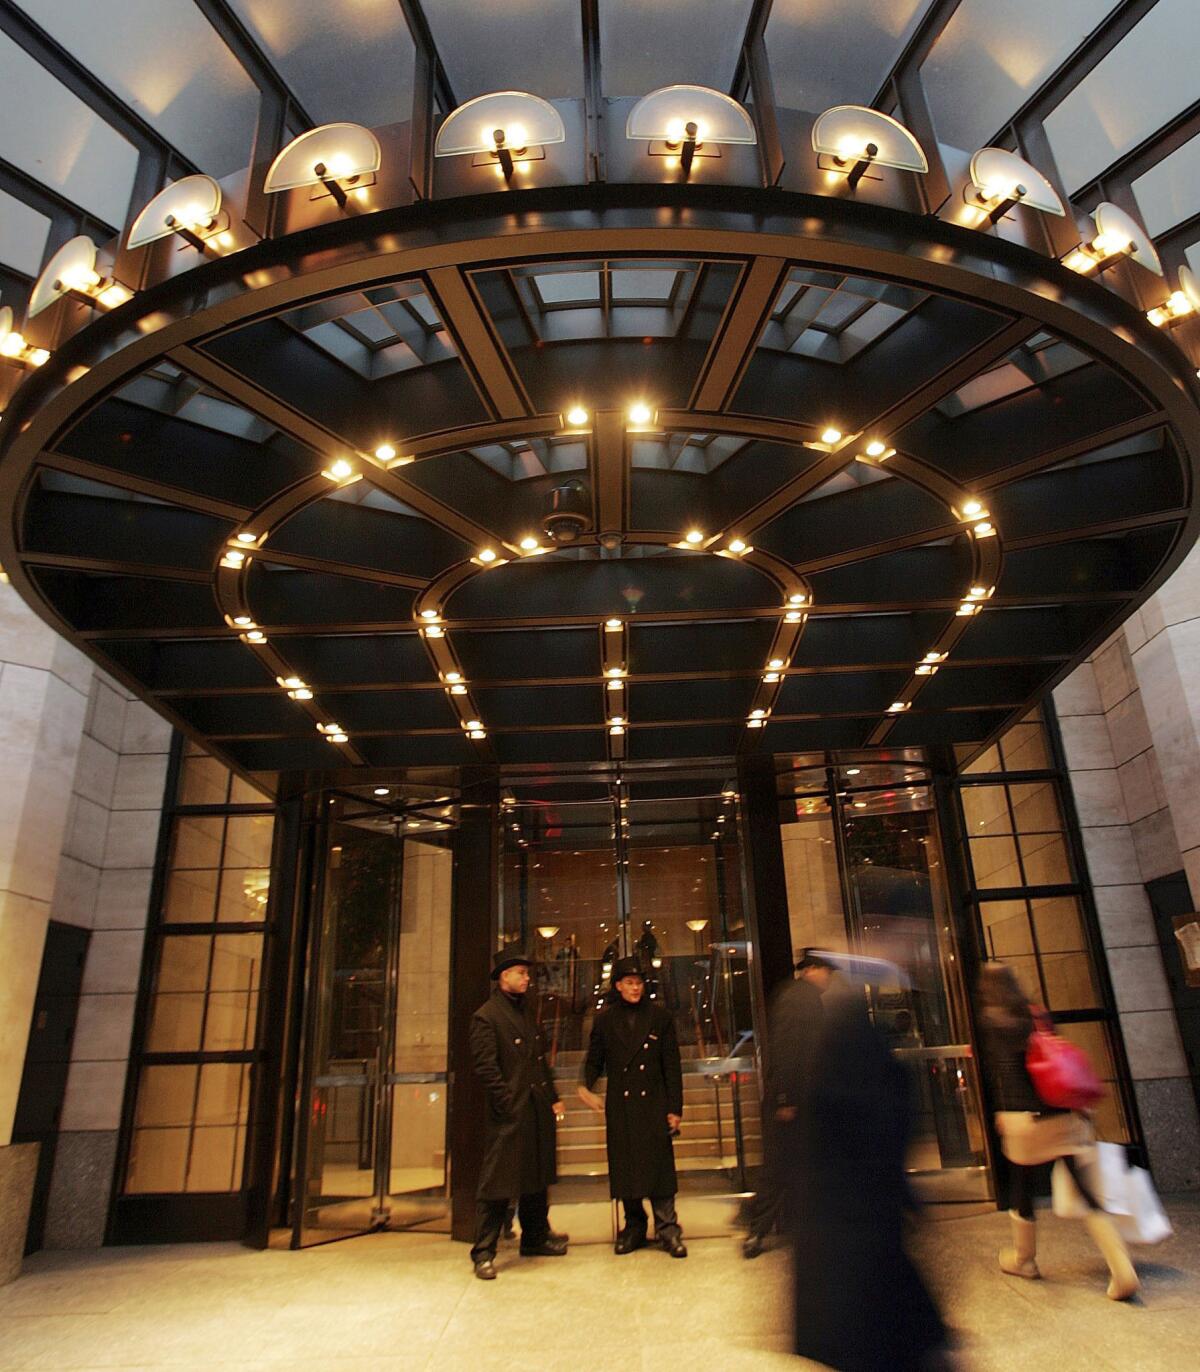 People walk by the Four Seasons Hotel in New York City.